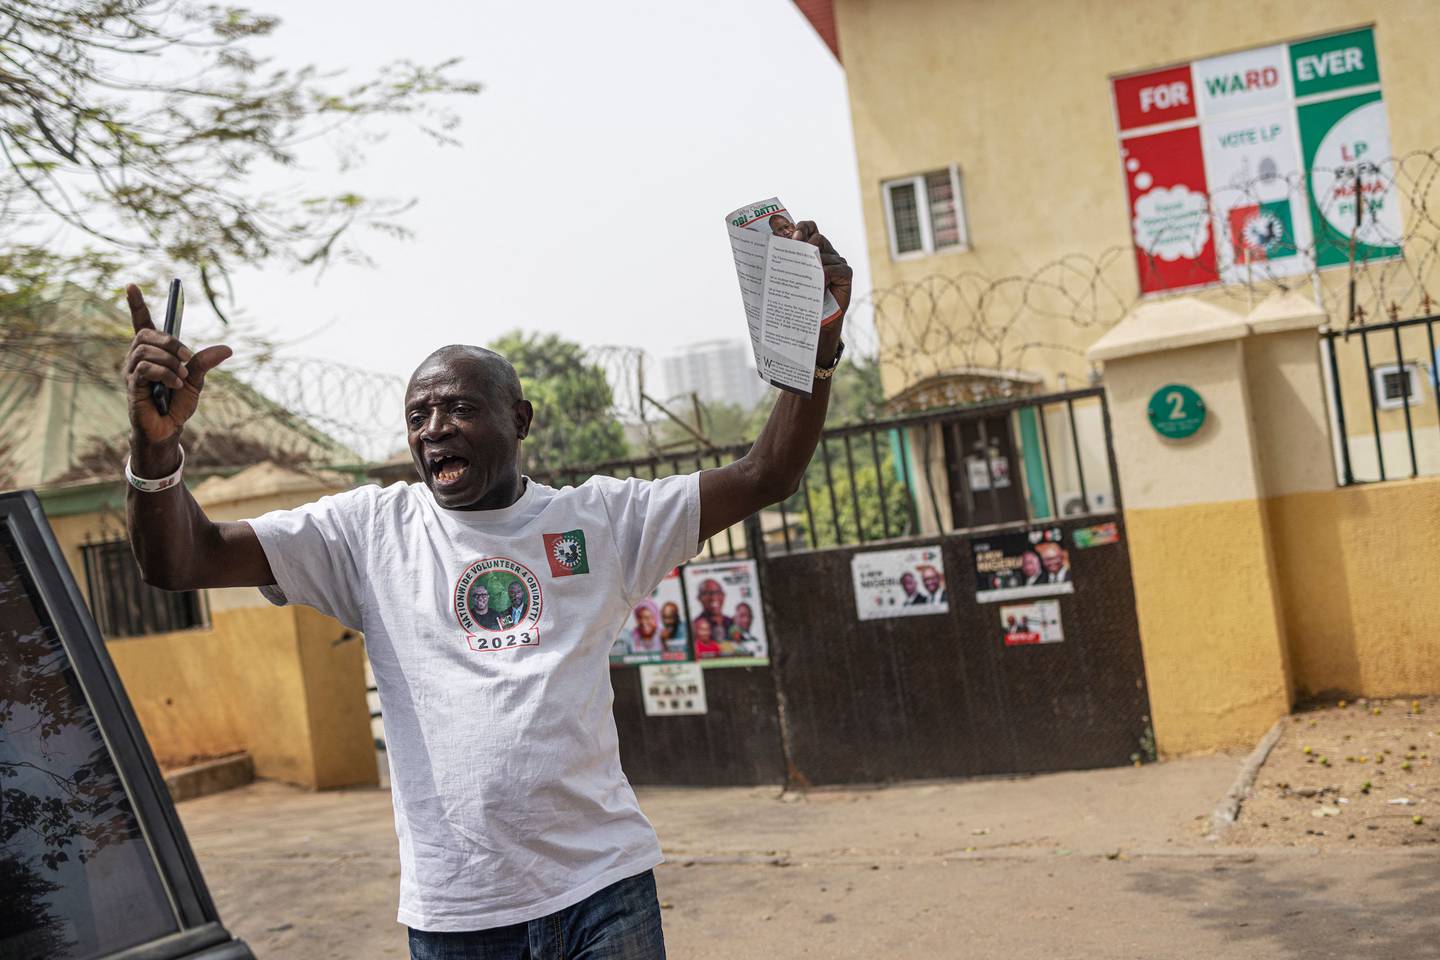 A man chants political slogans outside Labour Party candidate Peter Obi's offices in Abuja. AFP